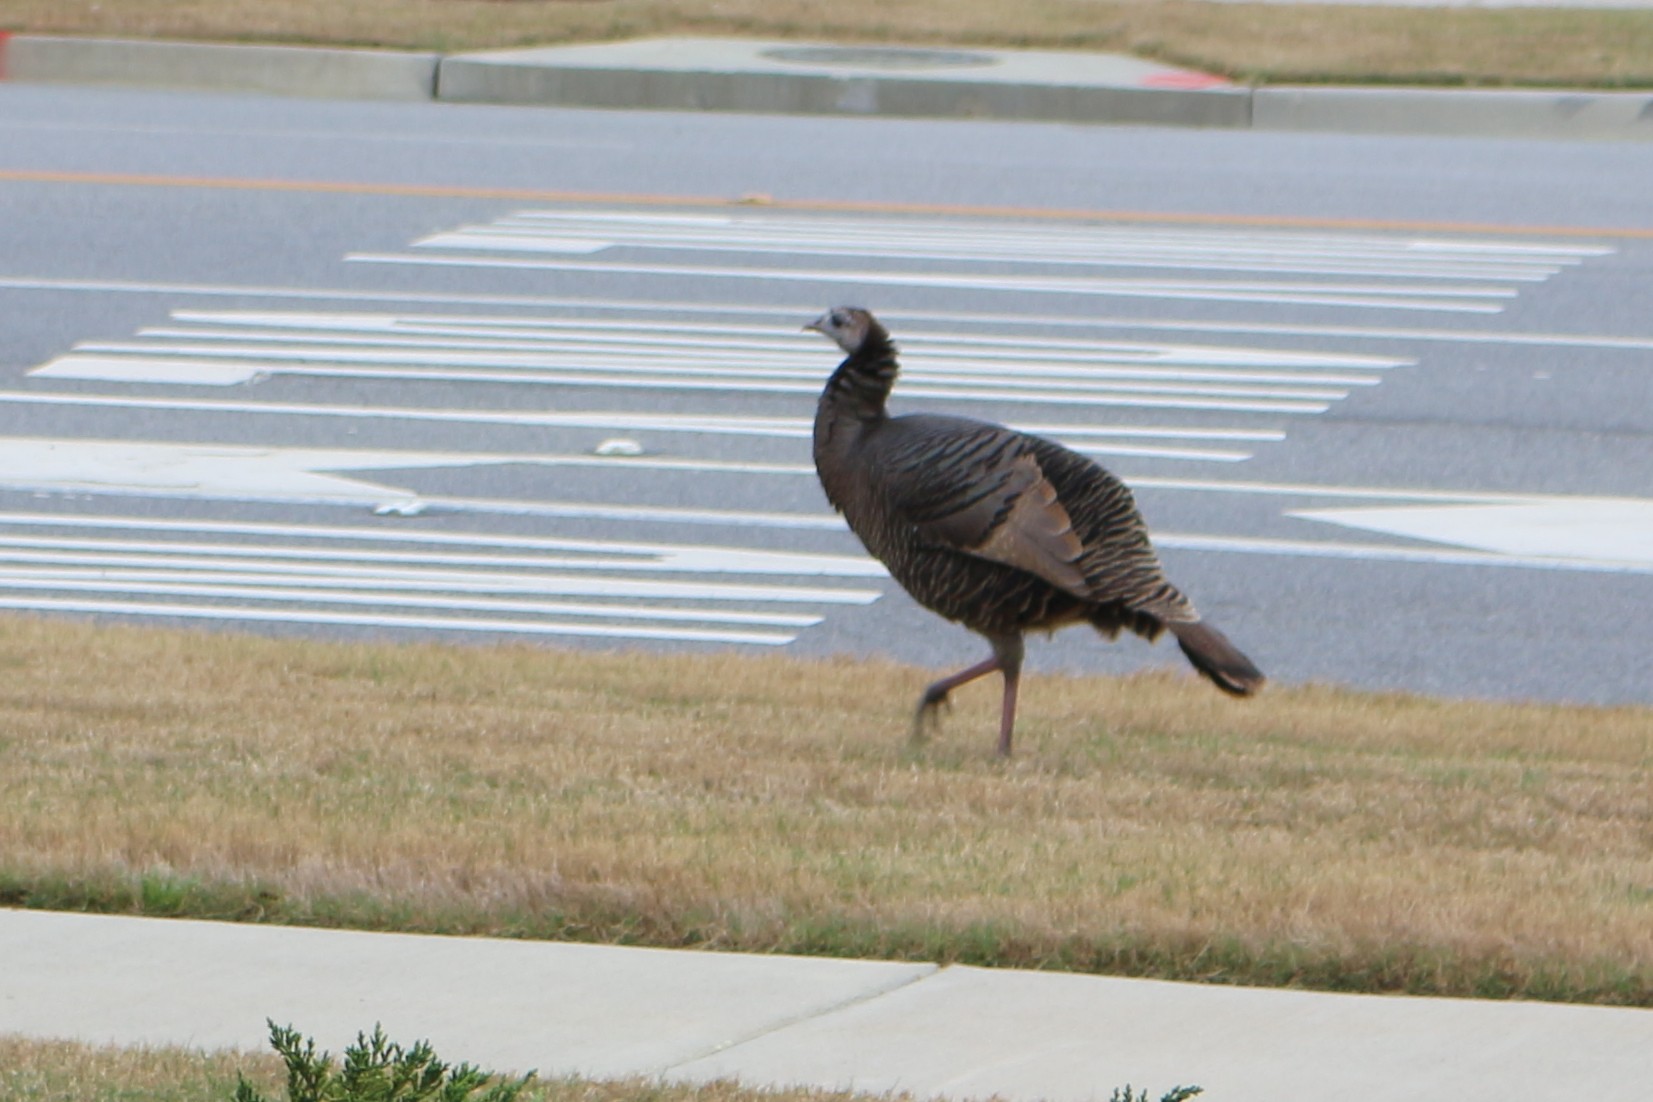 Why did the Turkey cross the road